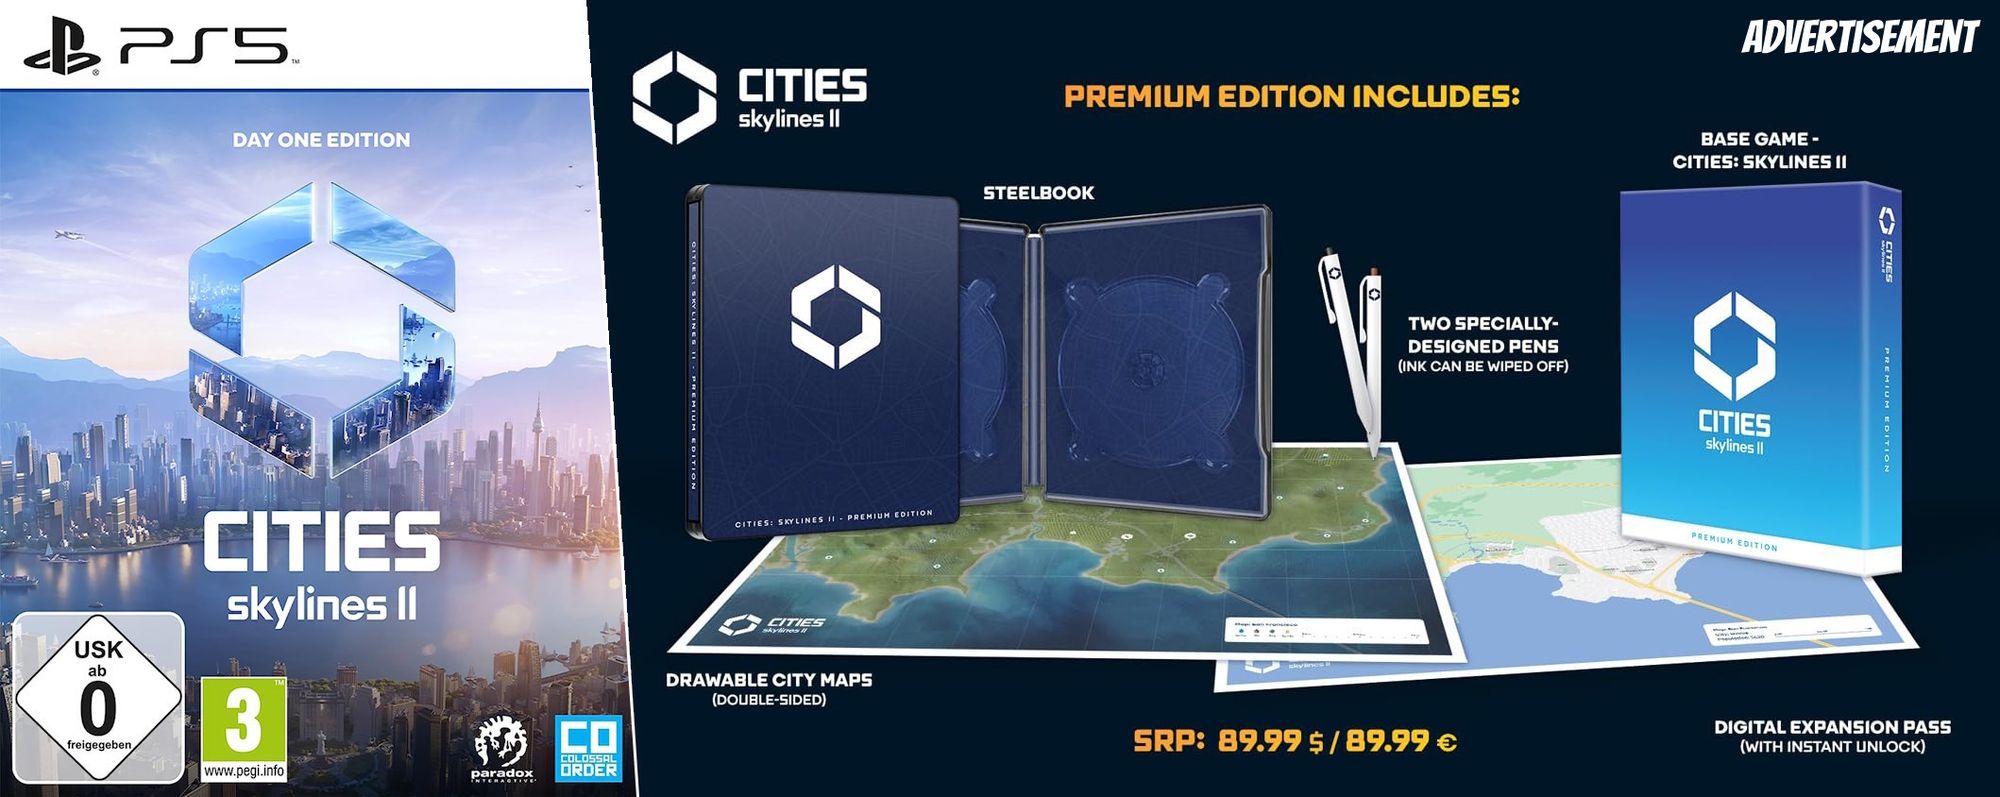 Cities Skylines 2 system requirements, Minimum and recommended PC specs